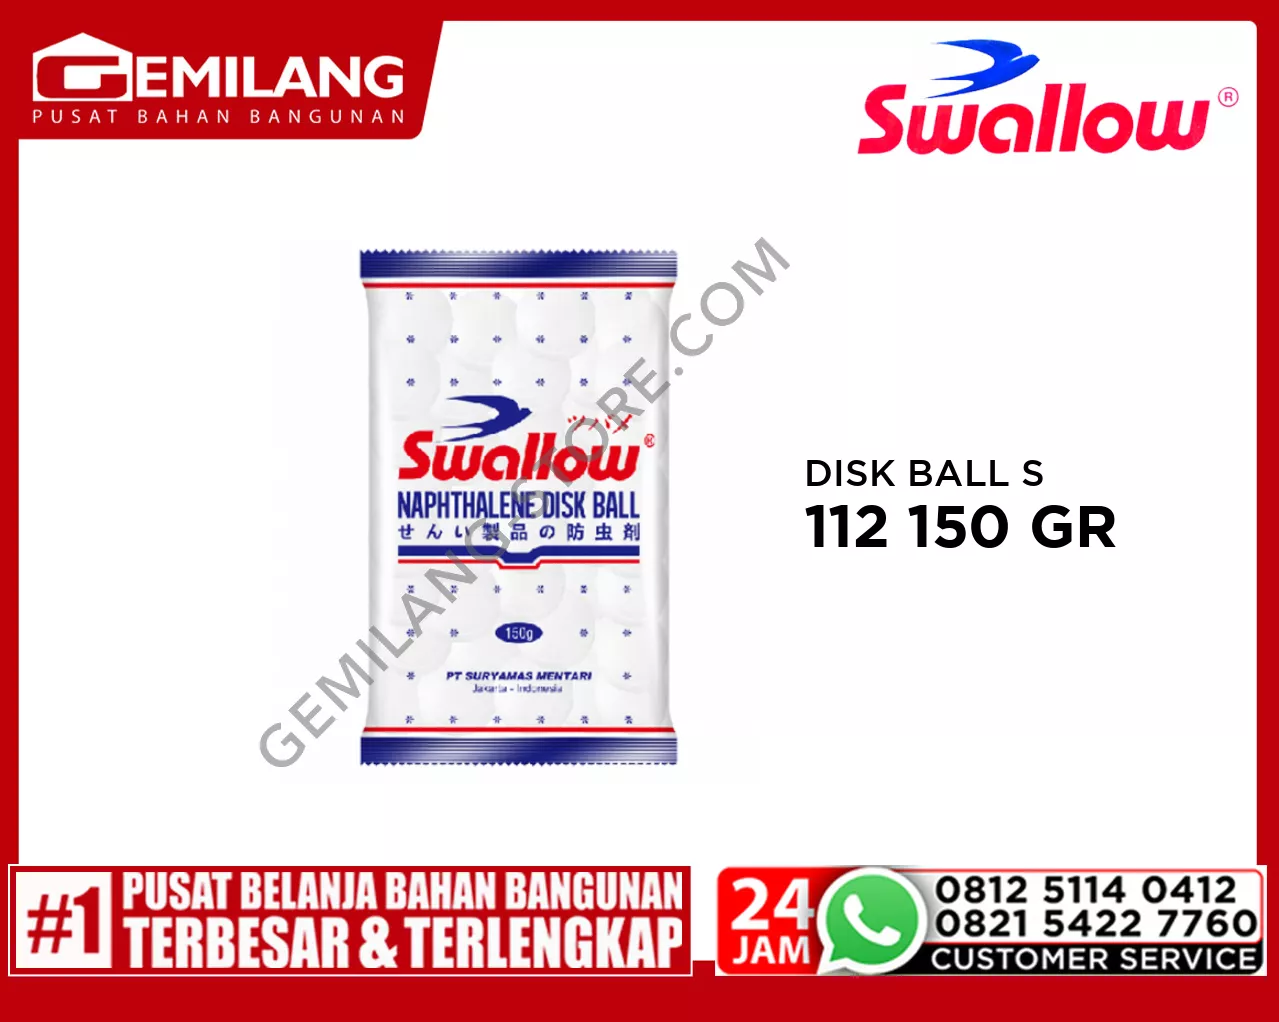 SWALLOW DISK BALL S 112 150 GR